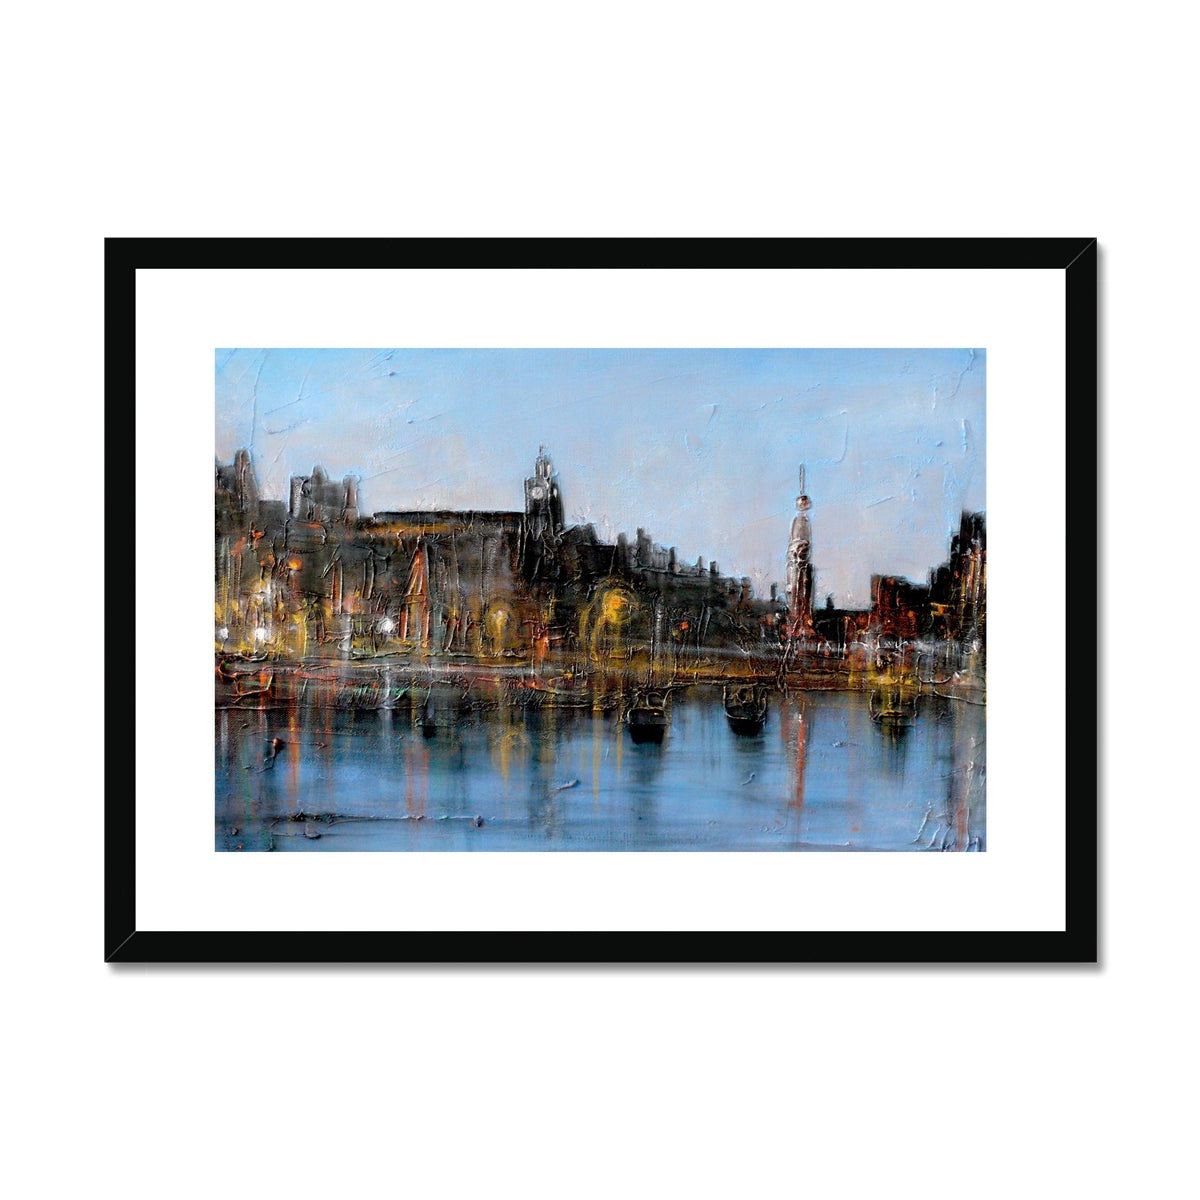 Winter In Amsterdam Painting | Framed & Mounted Prints From Scotland-Framed & Mounted Prints-World Art Gallery-A2 Landscape-Black Frame-Paintings, Prints, Homeware, Art Gifts From Scotland By Scottish Artist Kevin Hunter